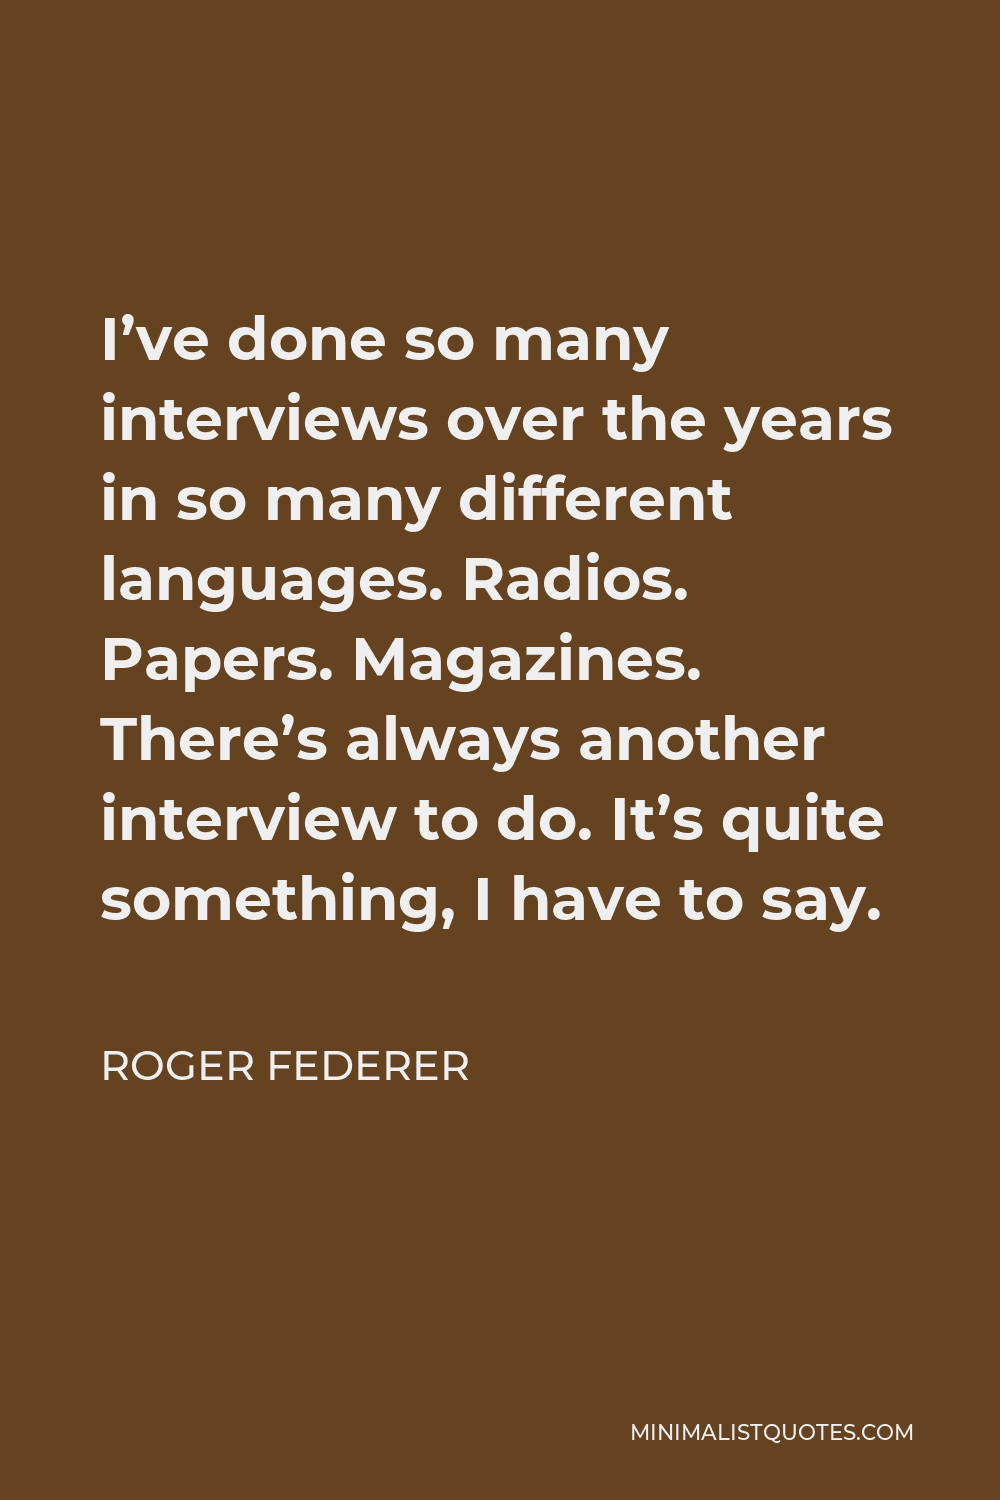 Roger Federer Quote - I’ve done so many interviews over the years in so many different languages. Radios. Papers. Magazines. There’s always another interview to do. It’s quite something, I have to say.